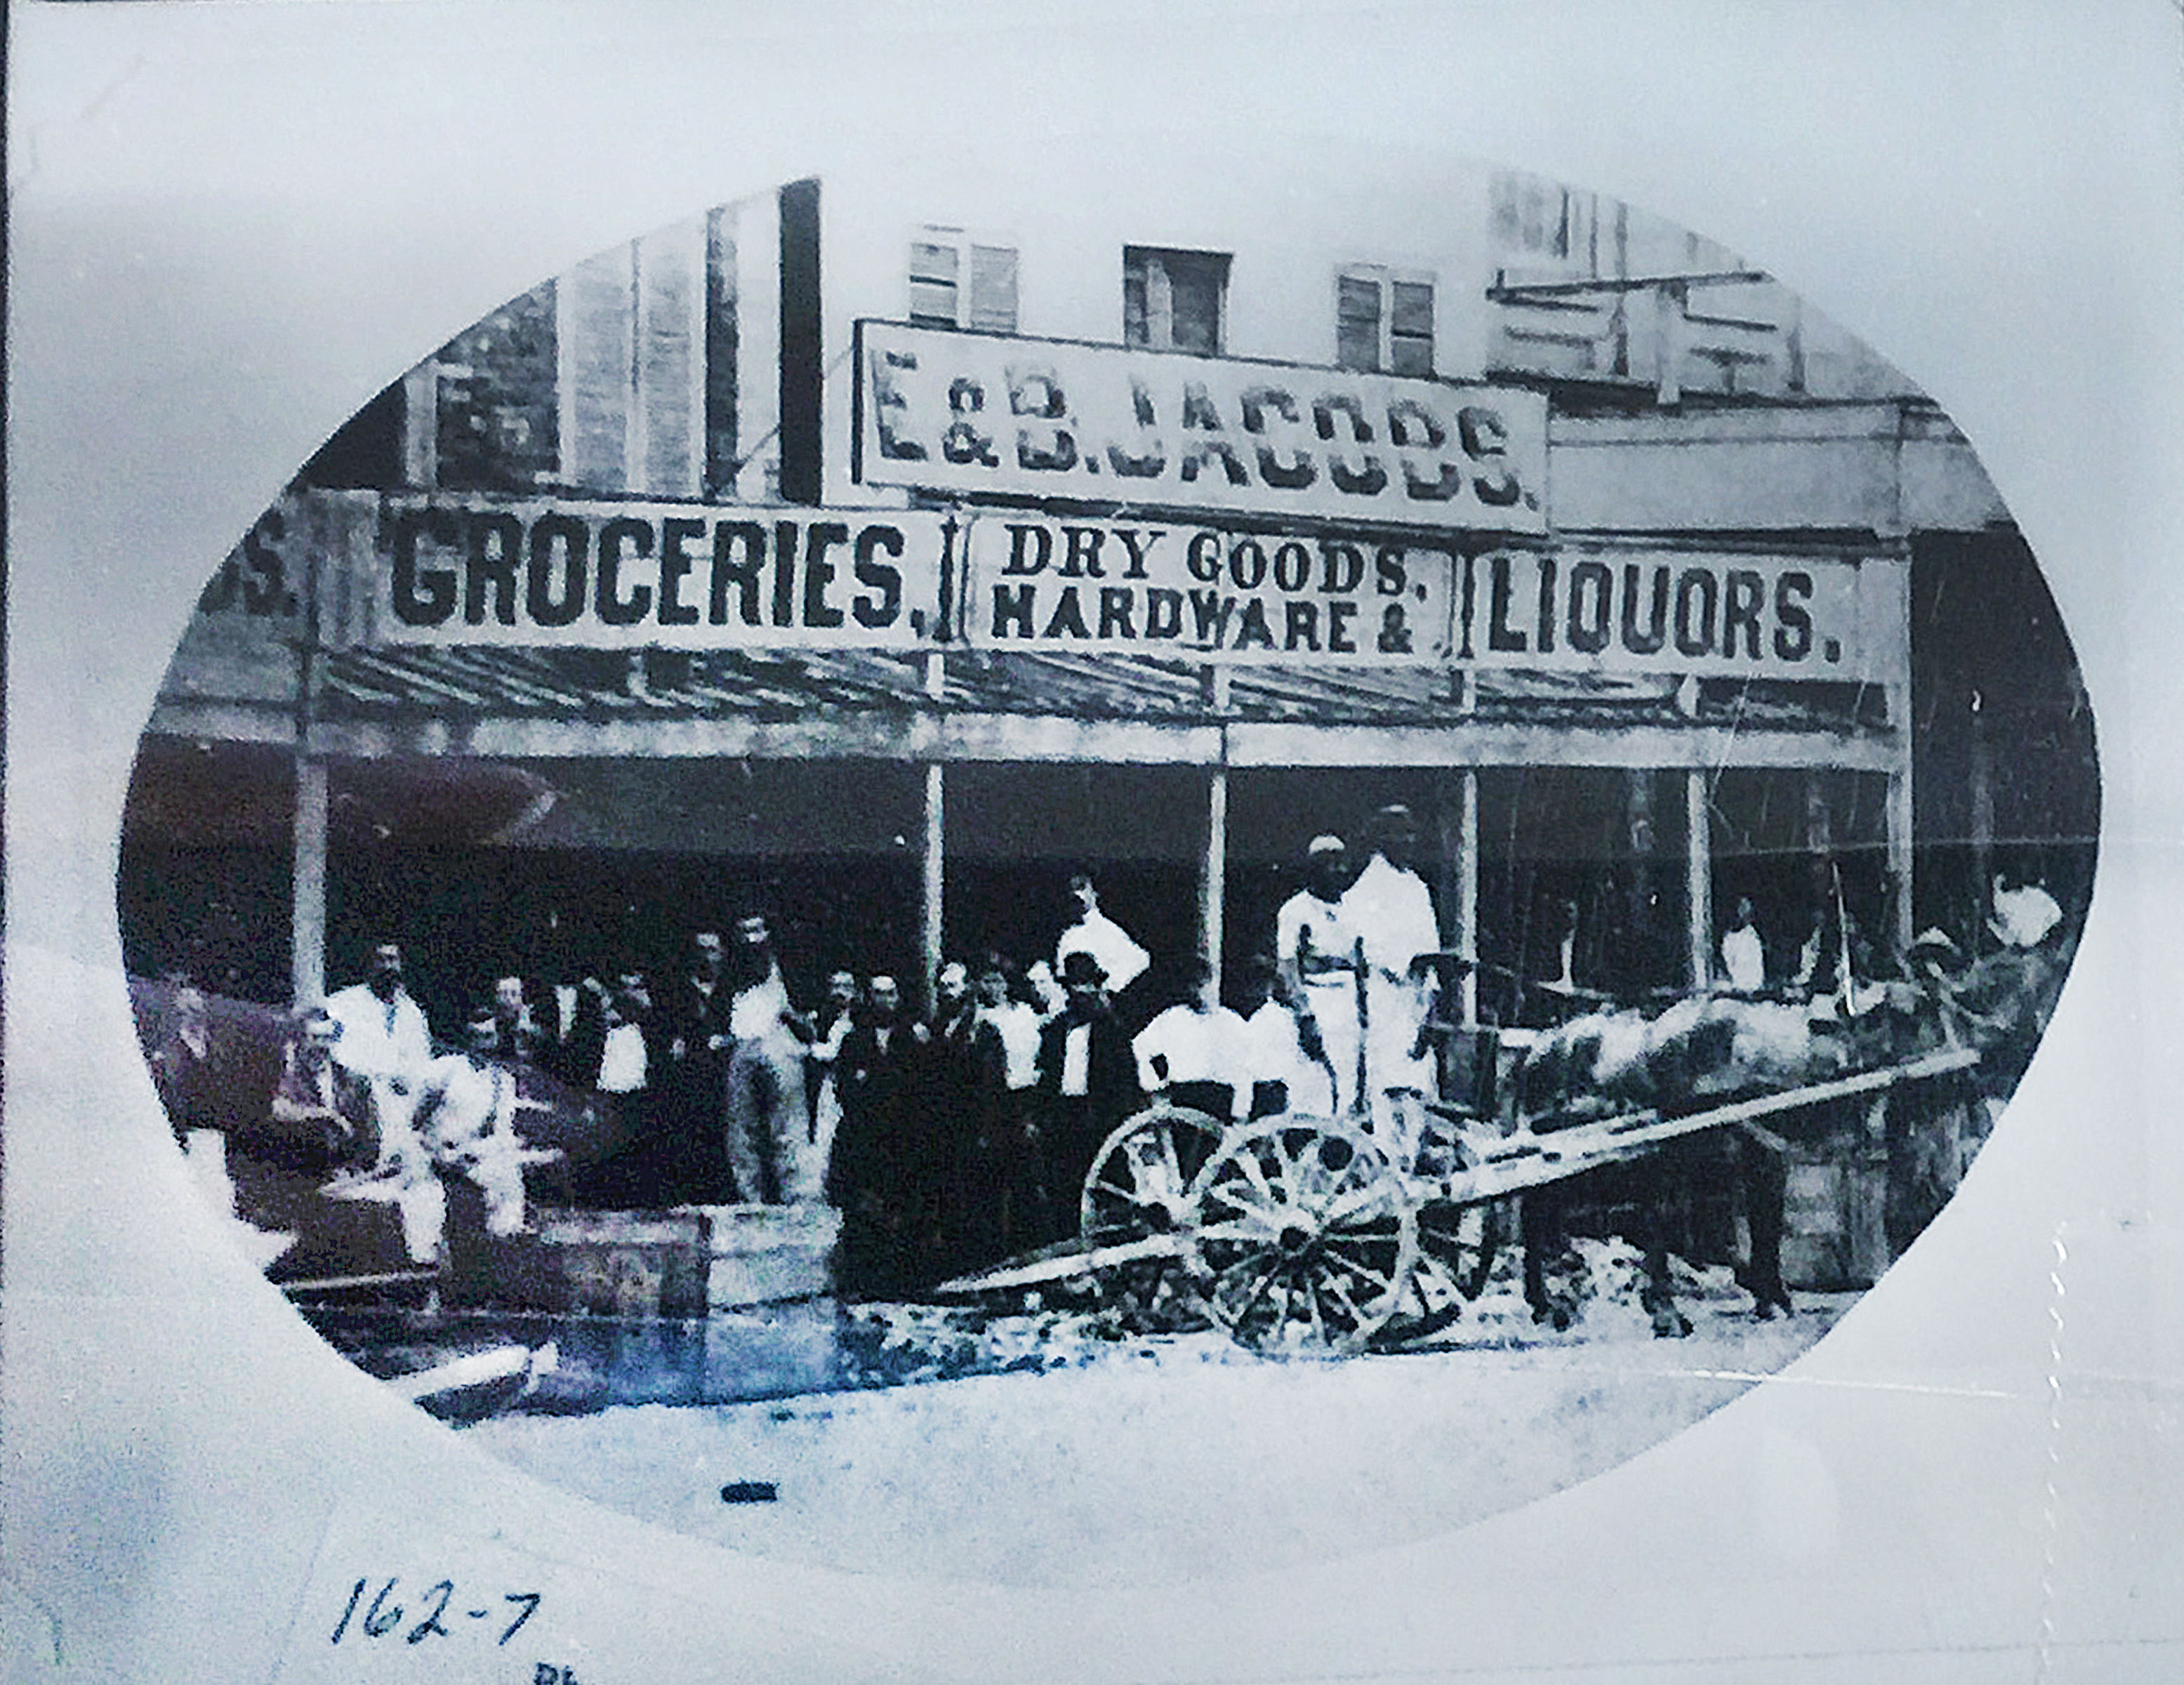 E & B Jacobs store in downtown Shreveport owned by Edwards Jacobs.